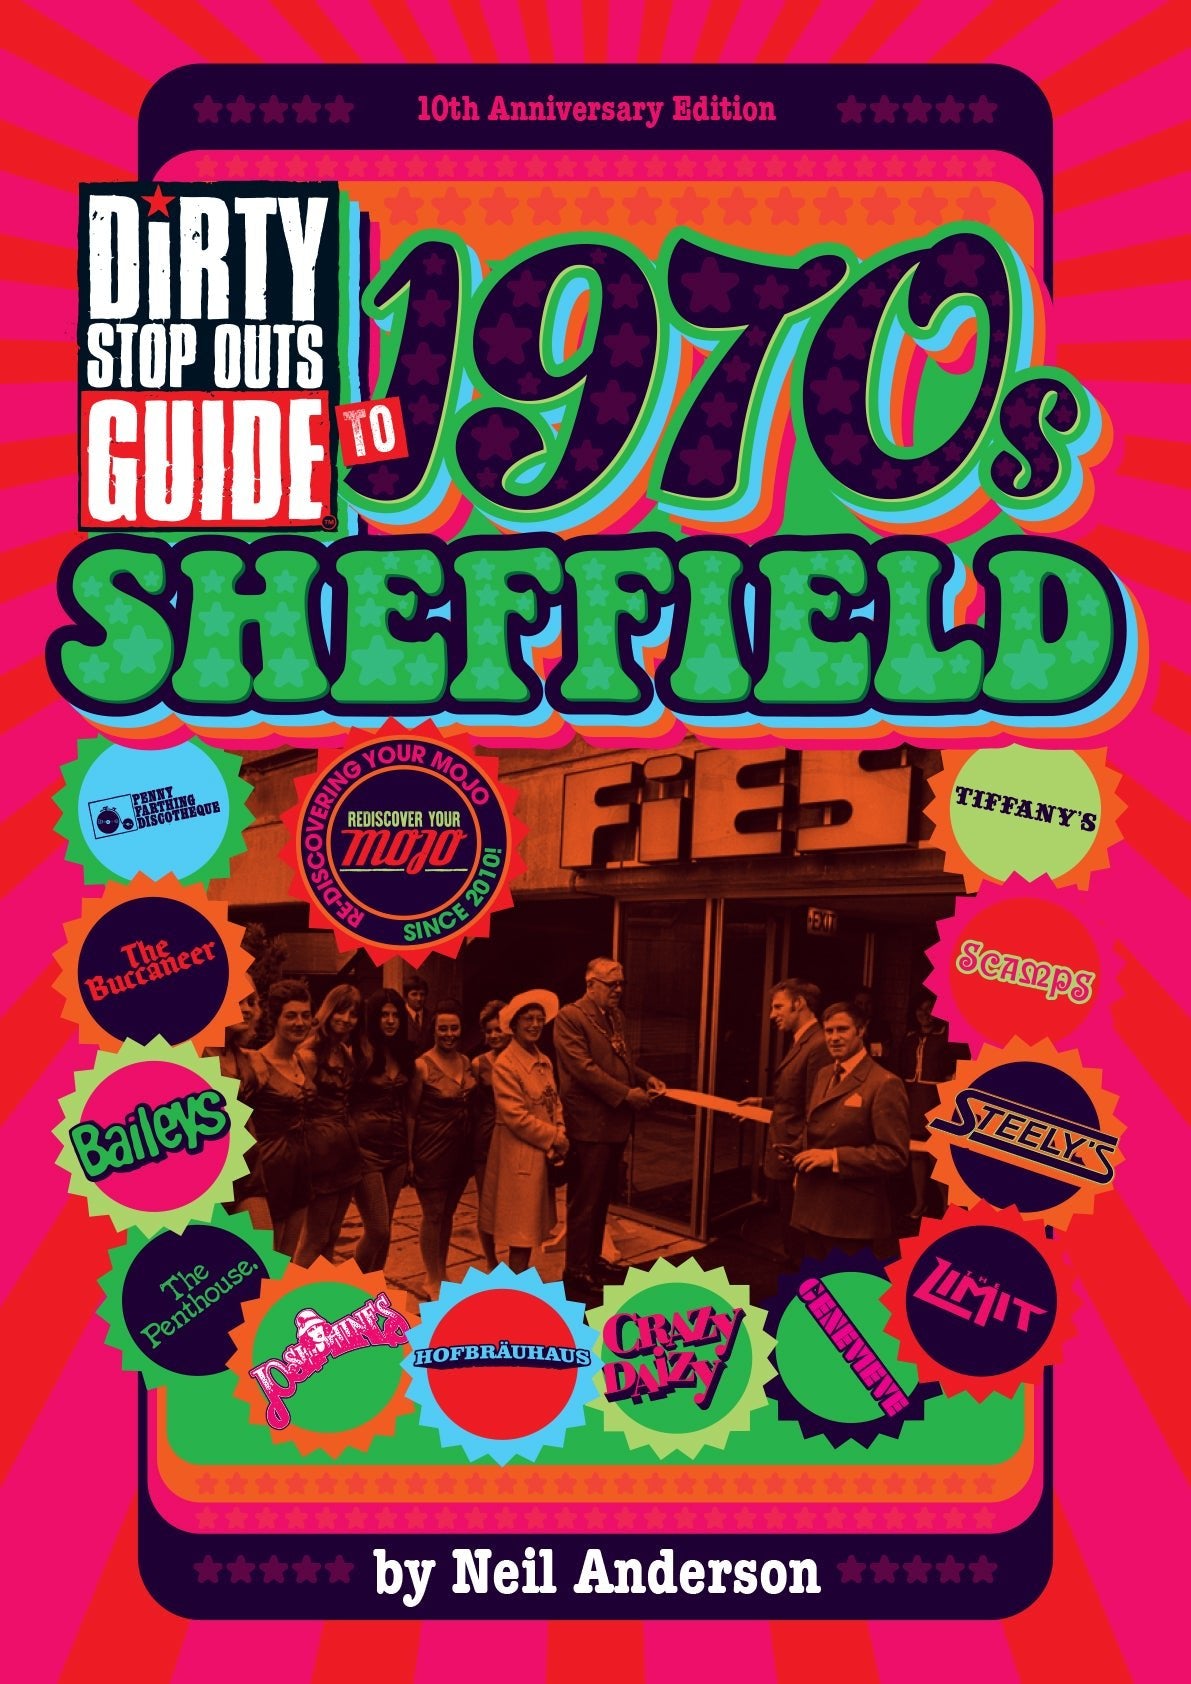 Dirty Stop Out's Guide to 1970s Sheffield - 10th anniversary collector's edition - Dirty Stop Outs